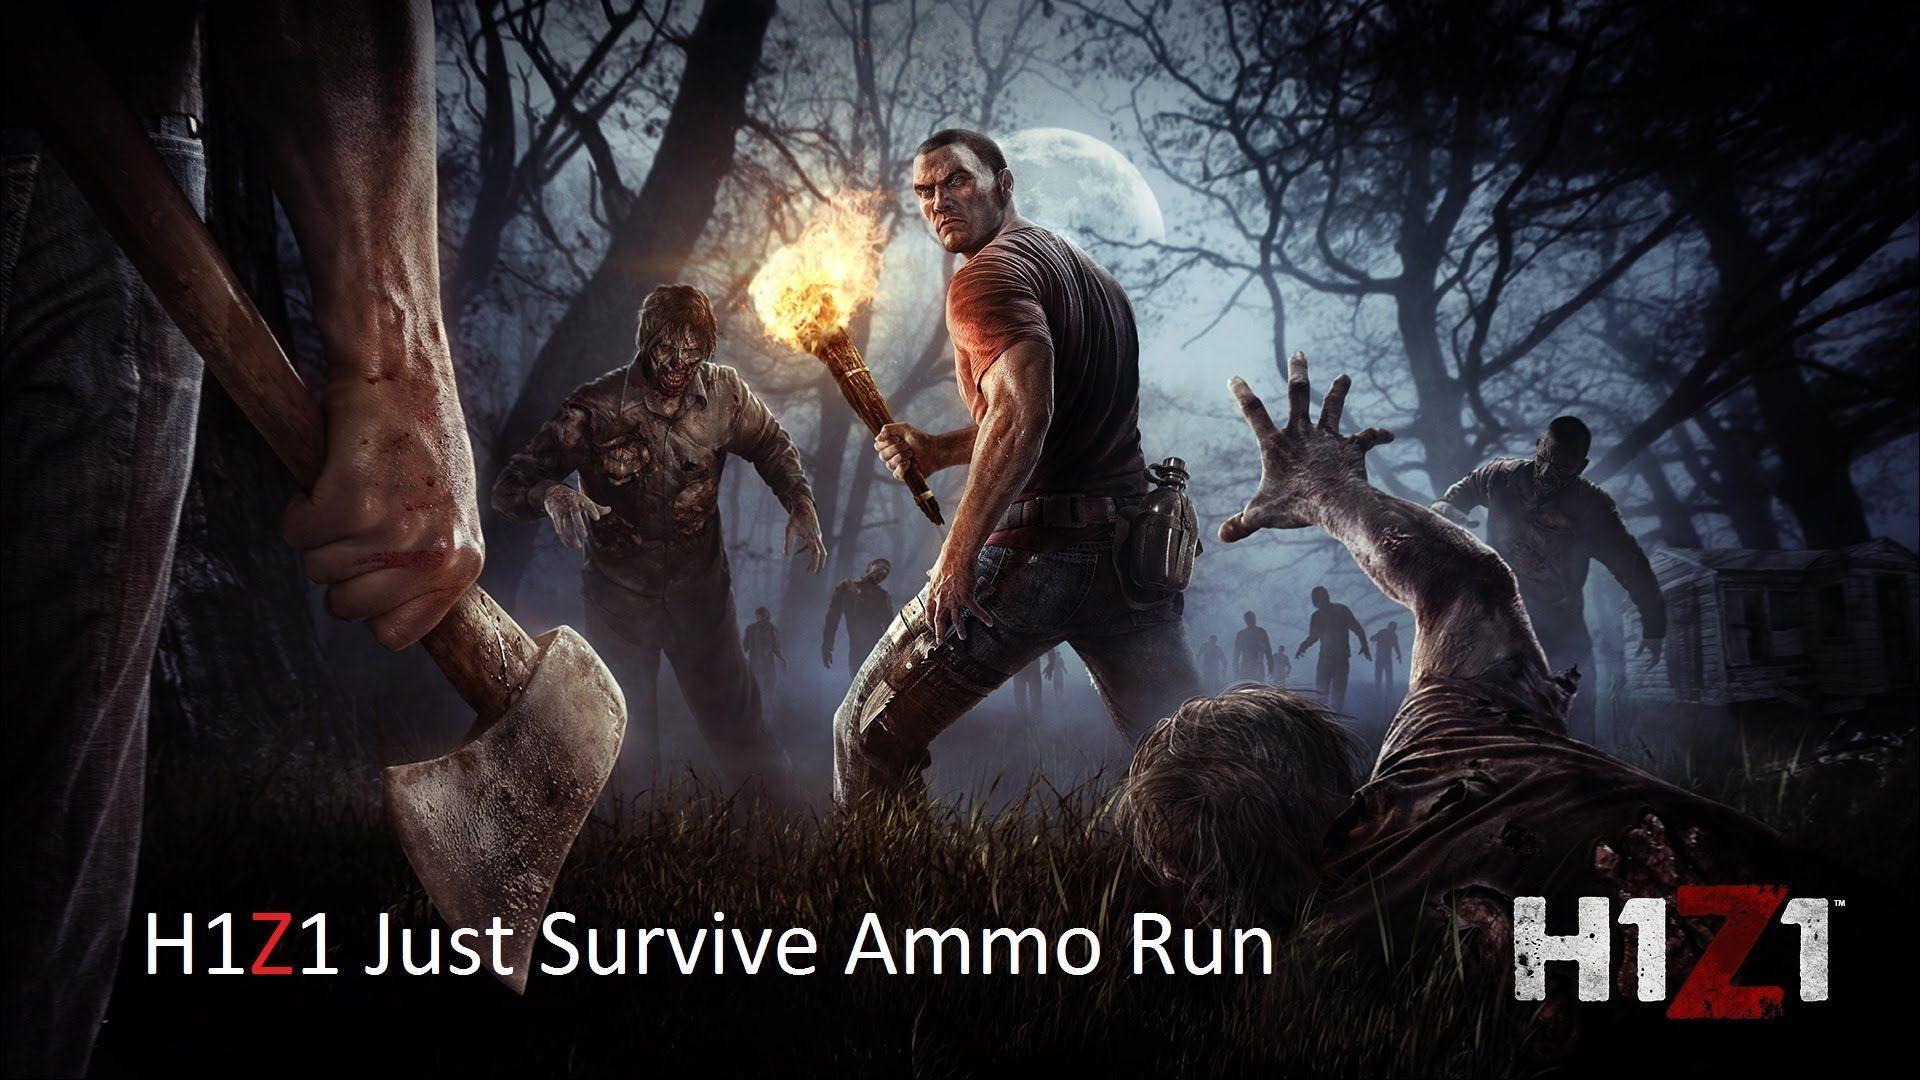 H1Z1 Just Survive ammo run In Cranberry where to find ammo